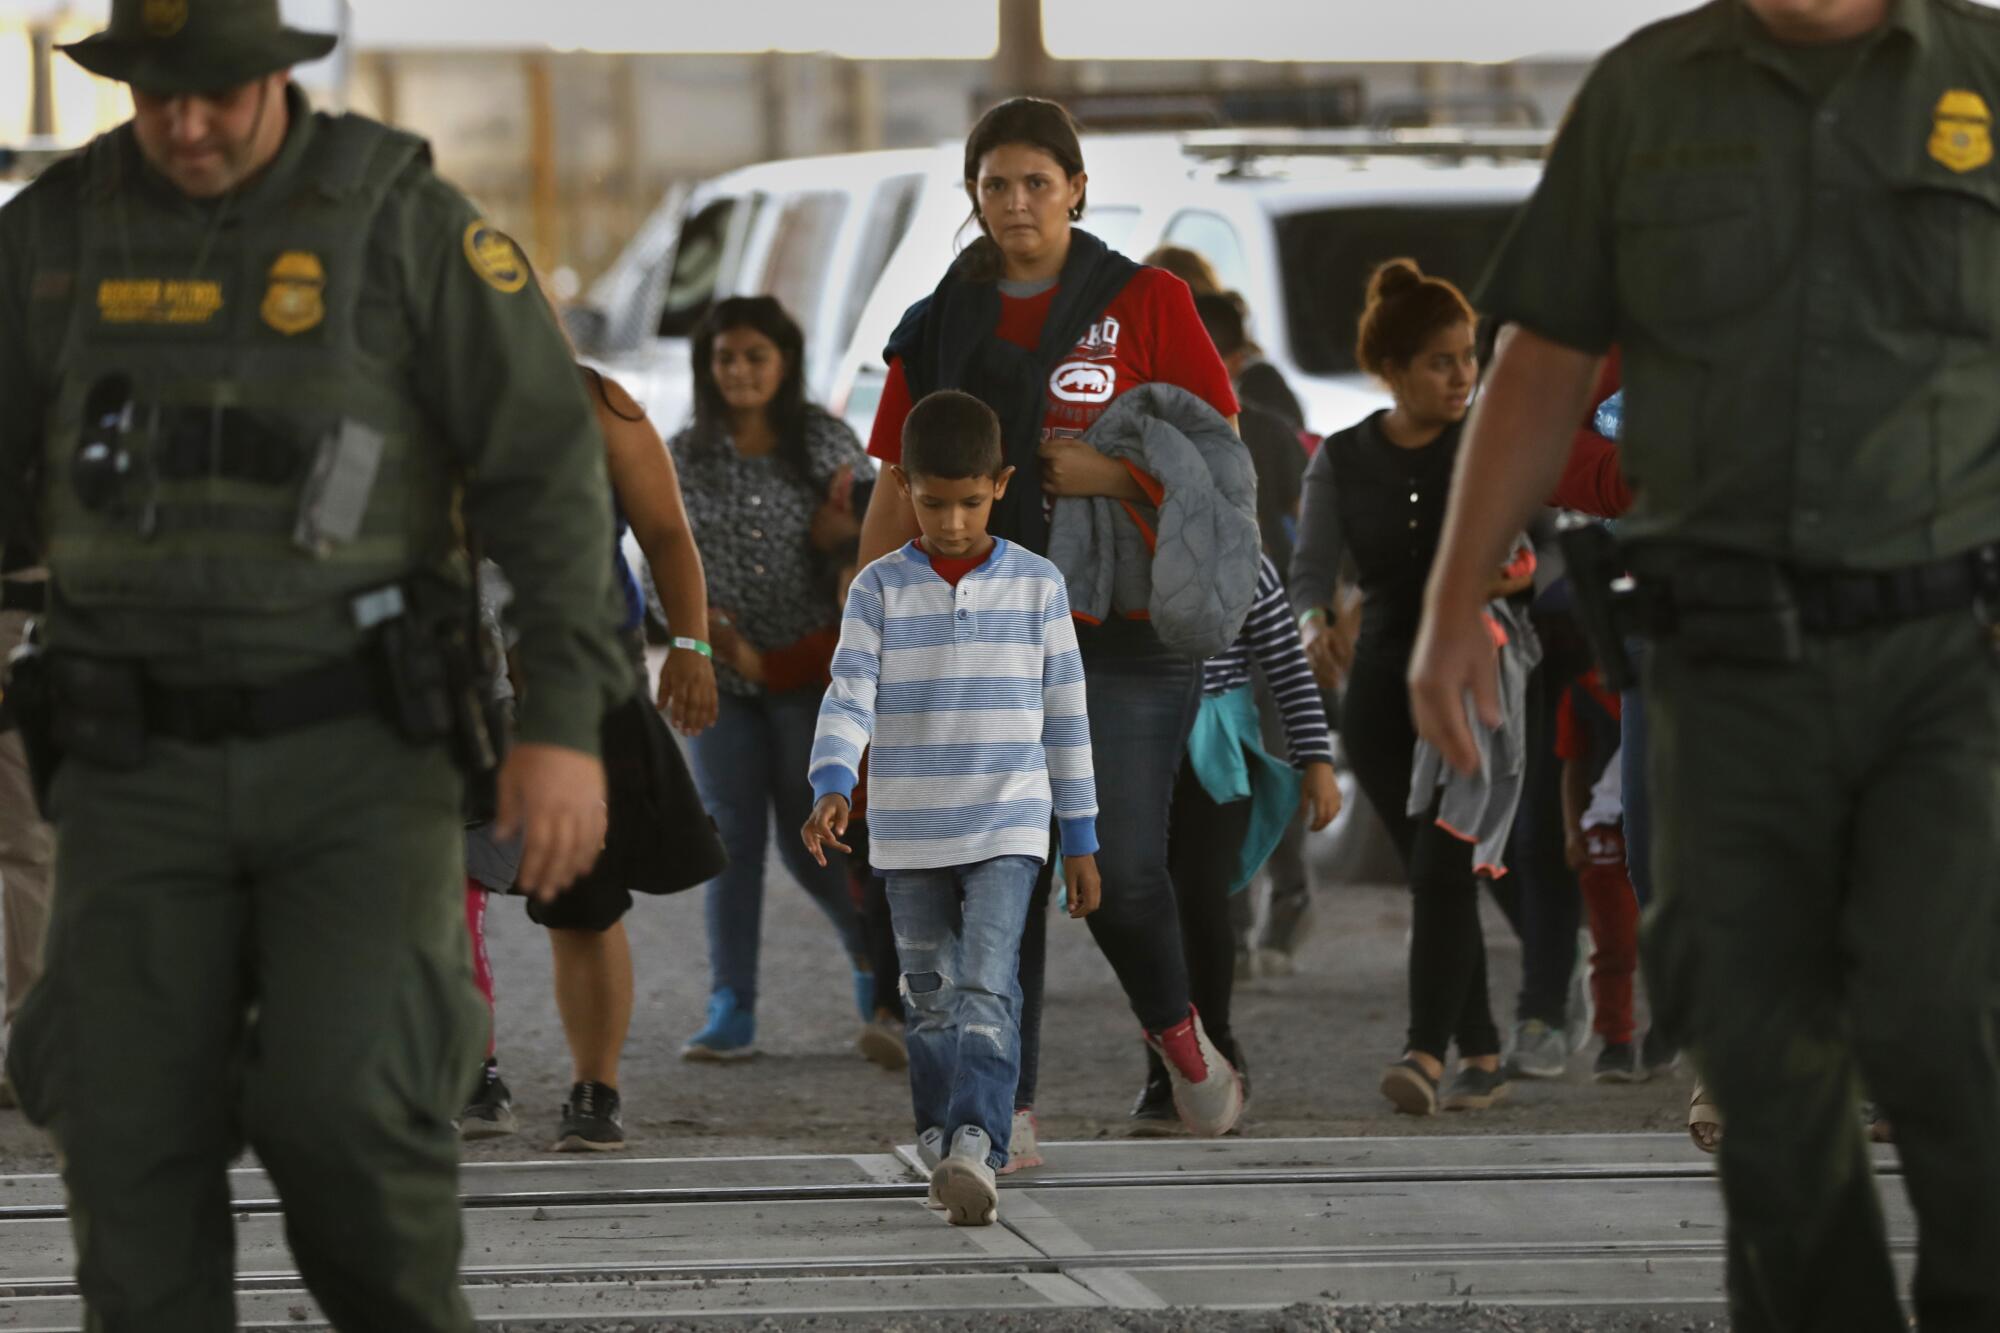 A group of about 50 men, women and children are led by U.S. Border Patrol agents to a holding area in El Paso